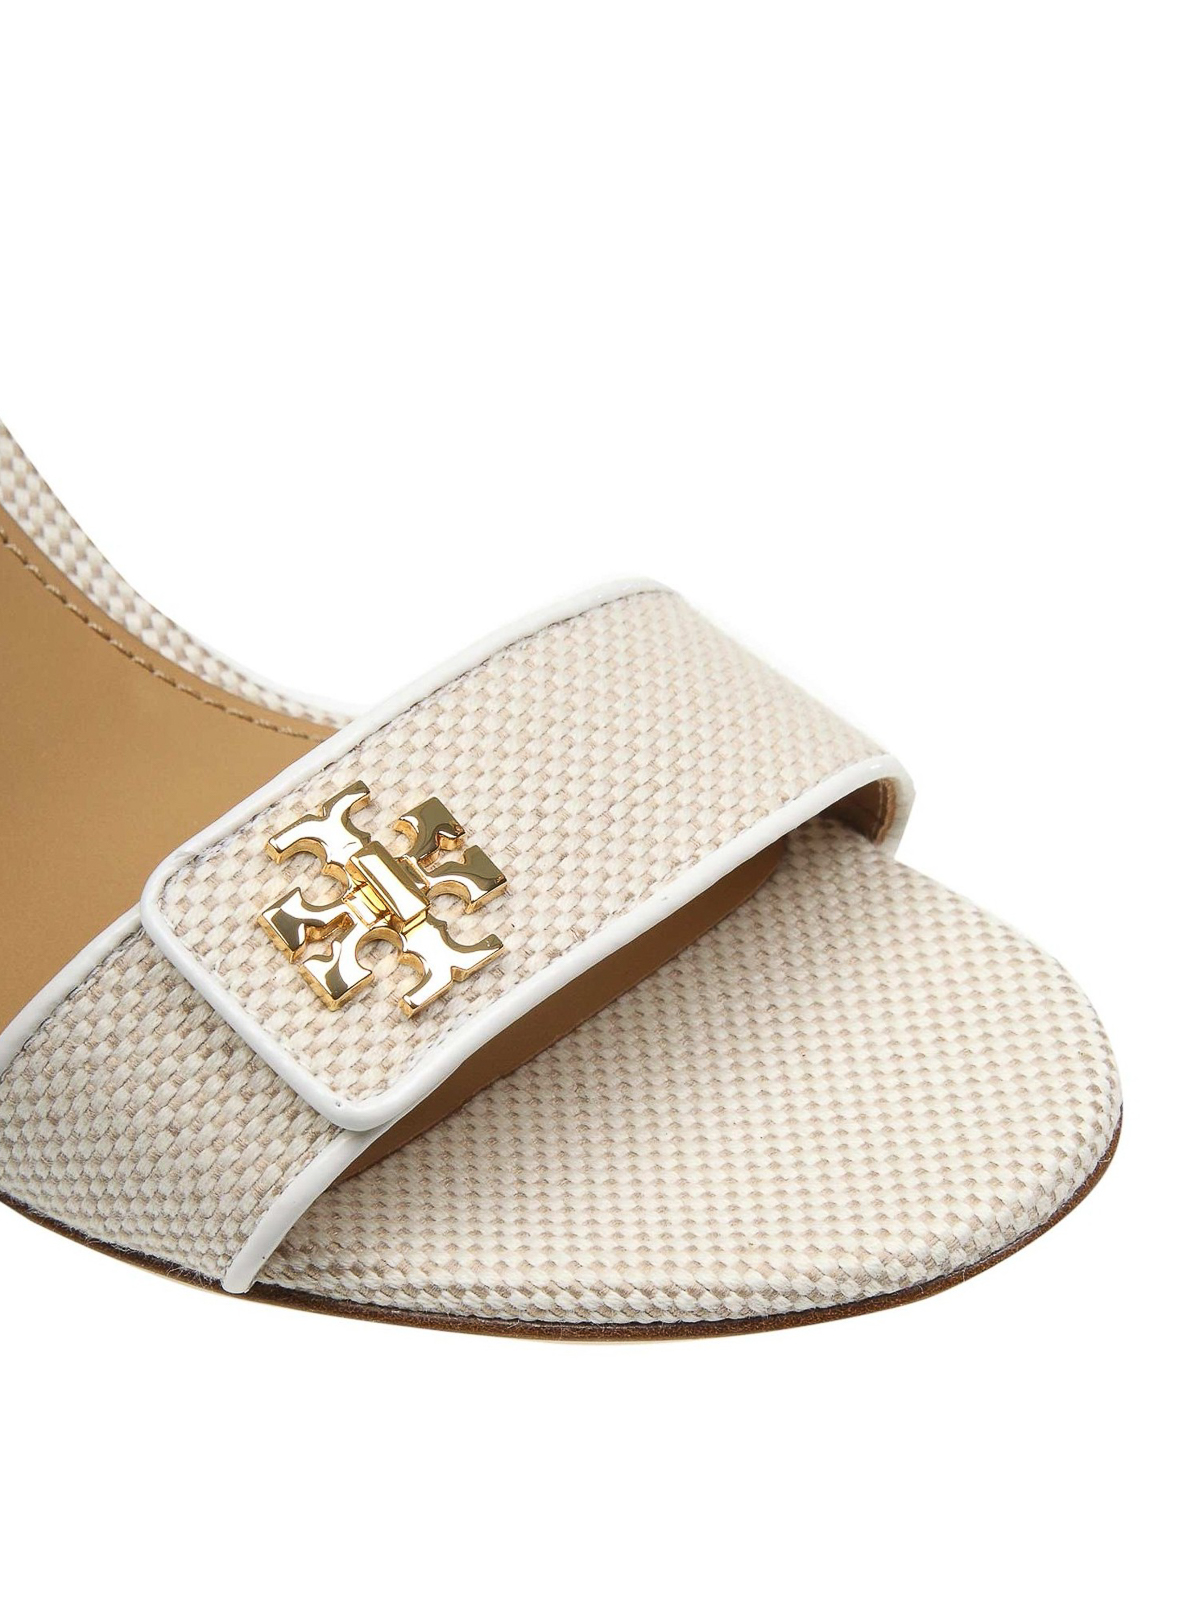 Tory Burch - Kira canvas and leather 